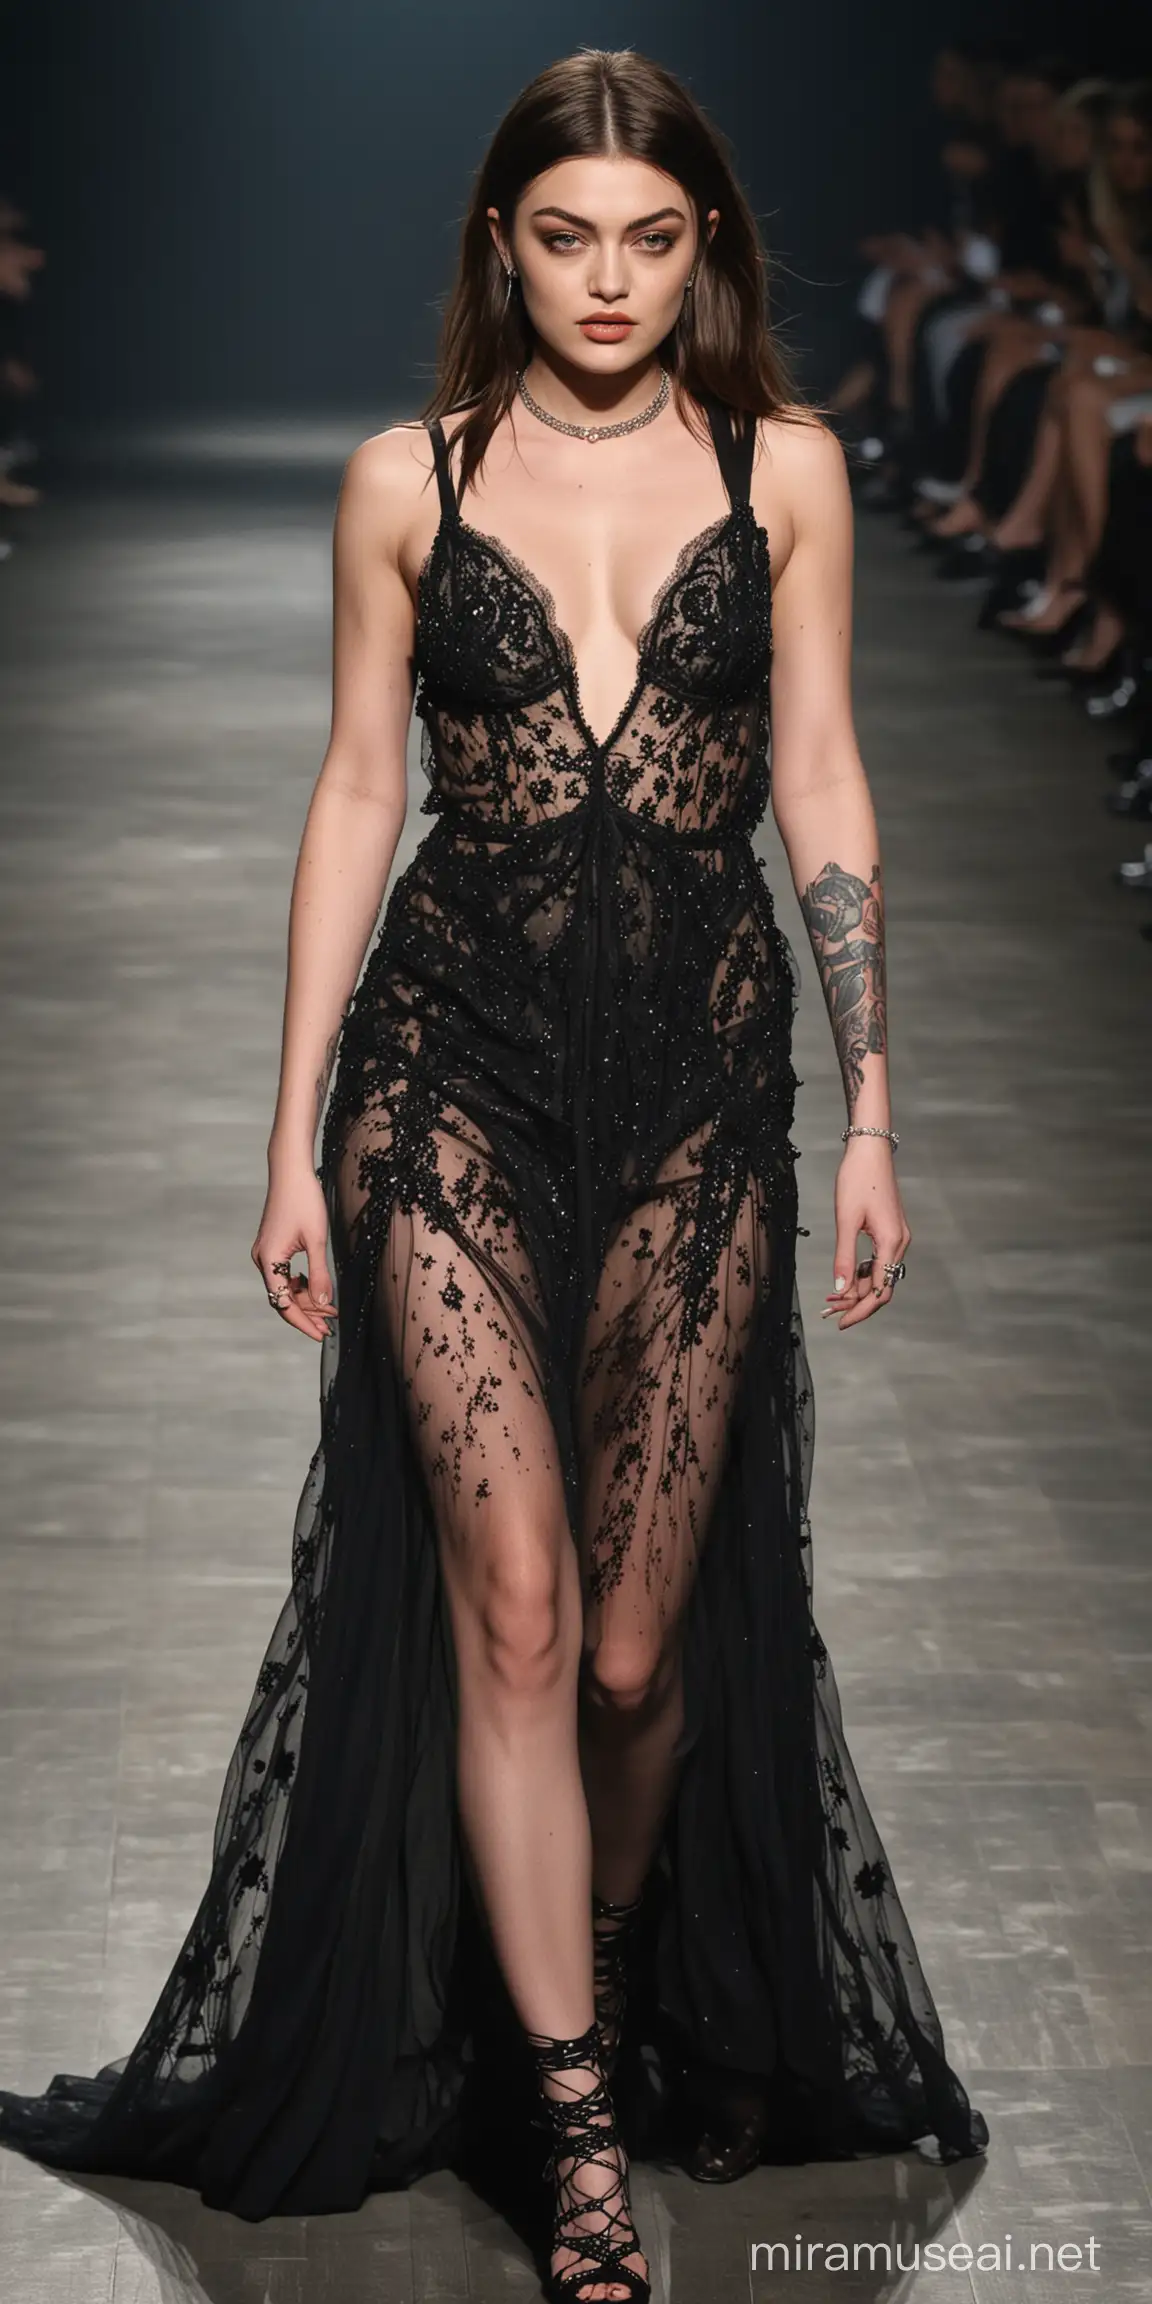 generate an image of a woman that looks like a combination of Gigi Hadid and Frances bean Cobain, she is on a runway, she is wearing a sexy but elegant gown, she has dark hair